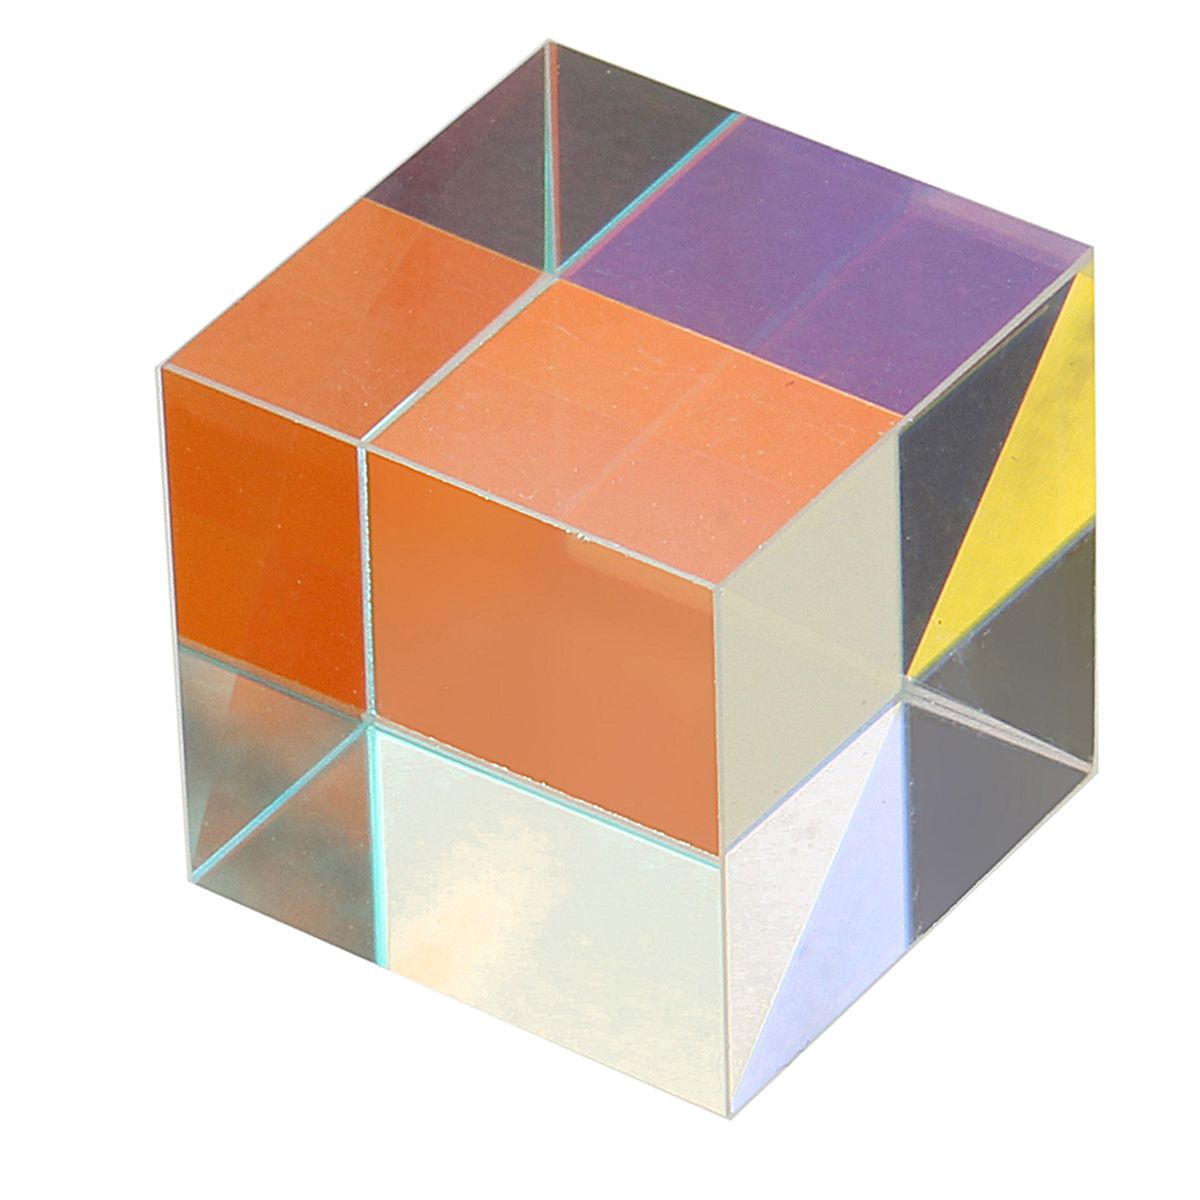 25x25mm-Color-Combination-Optical-Cross-Splitter-Prism-Square-Cube-Teaching-Tool-1376574